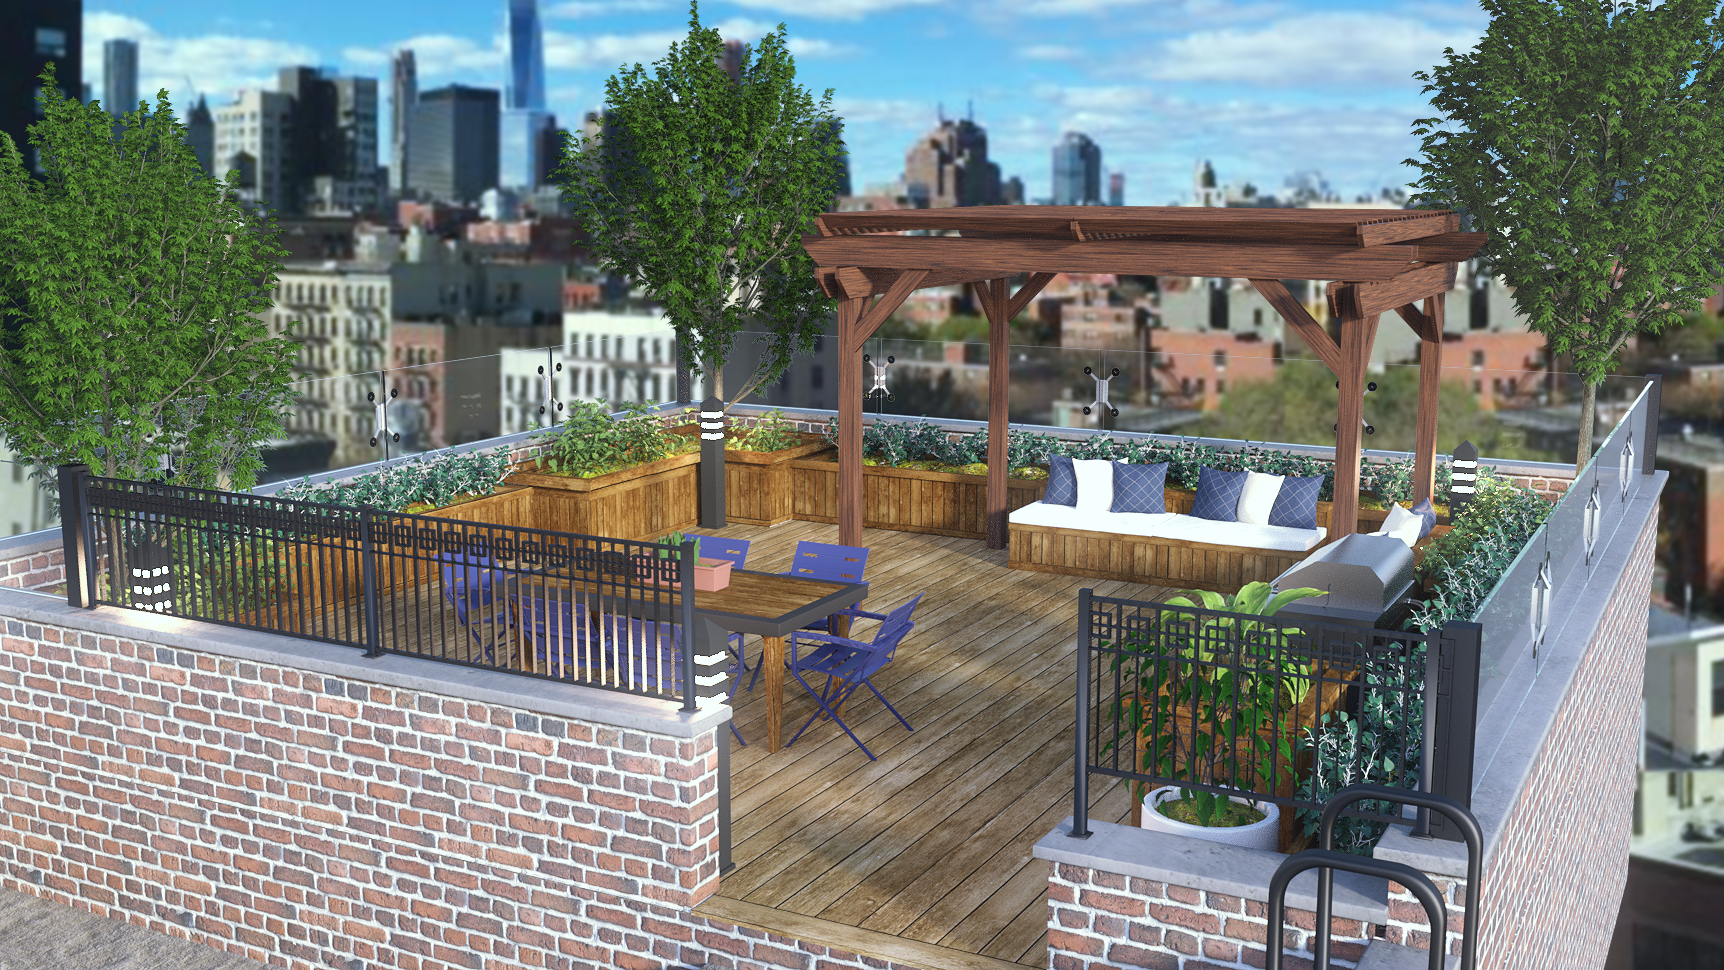 Roofdeck Patio by: PerspectX, 3D Models by Daz 3D